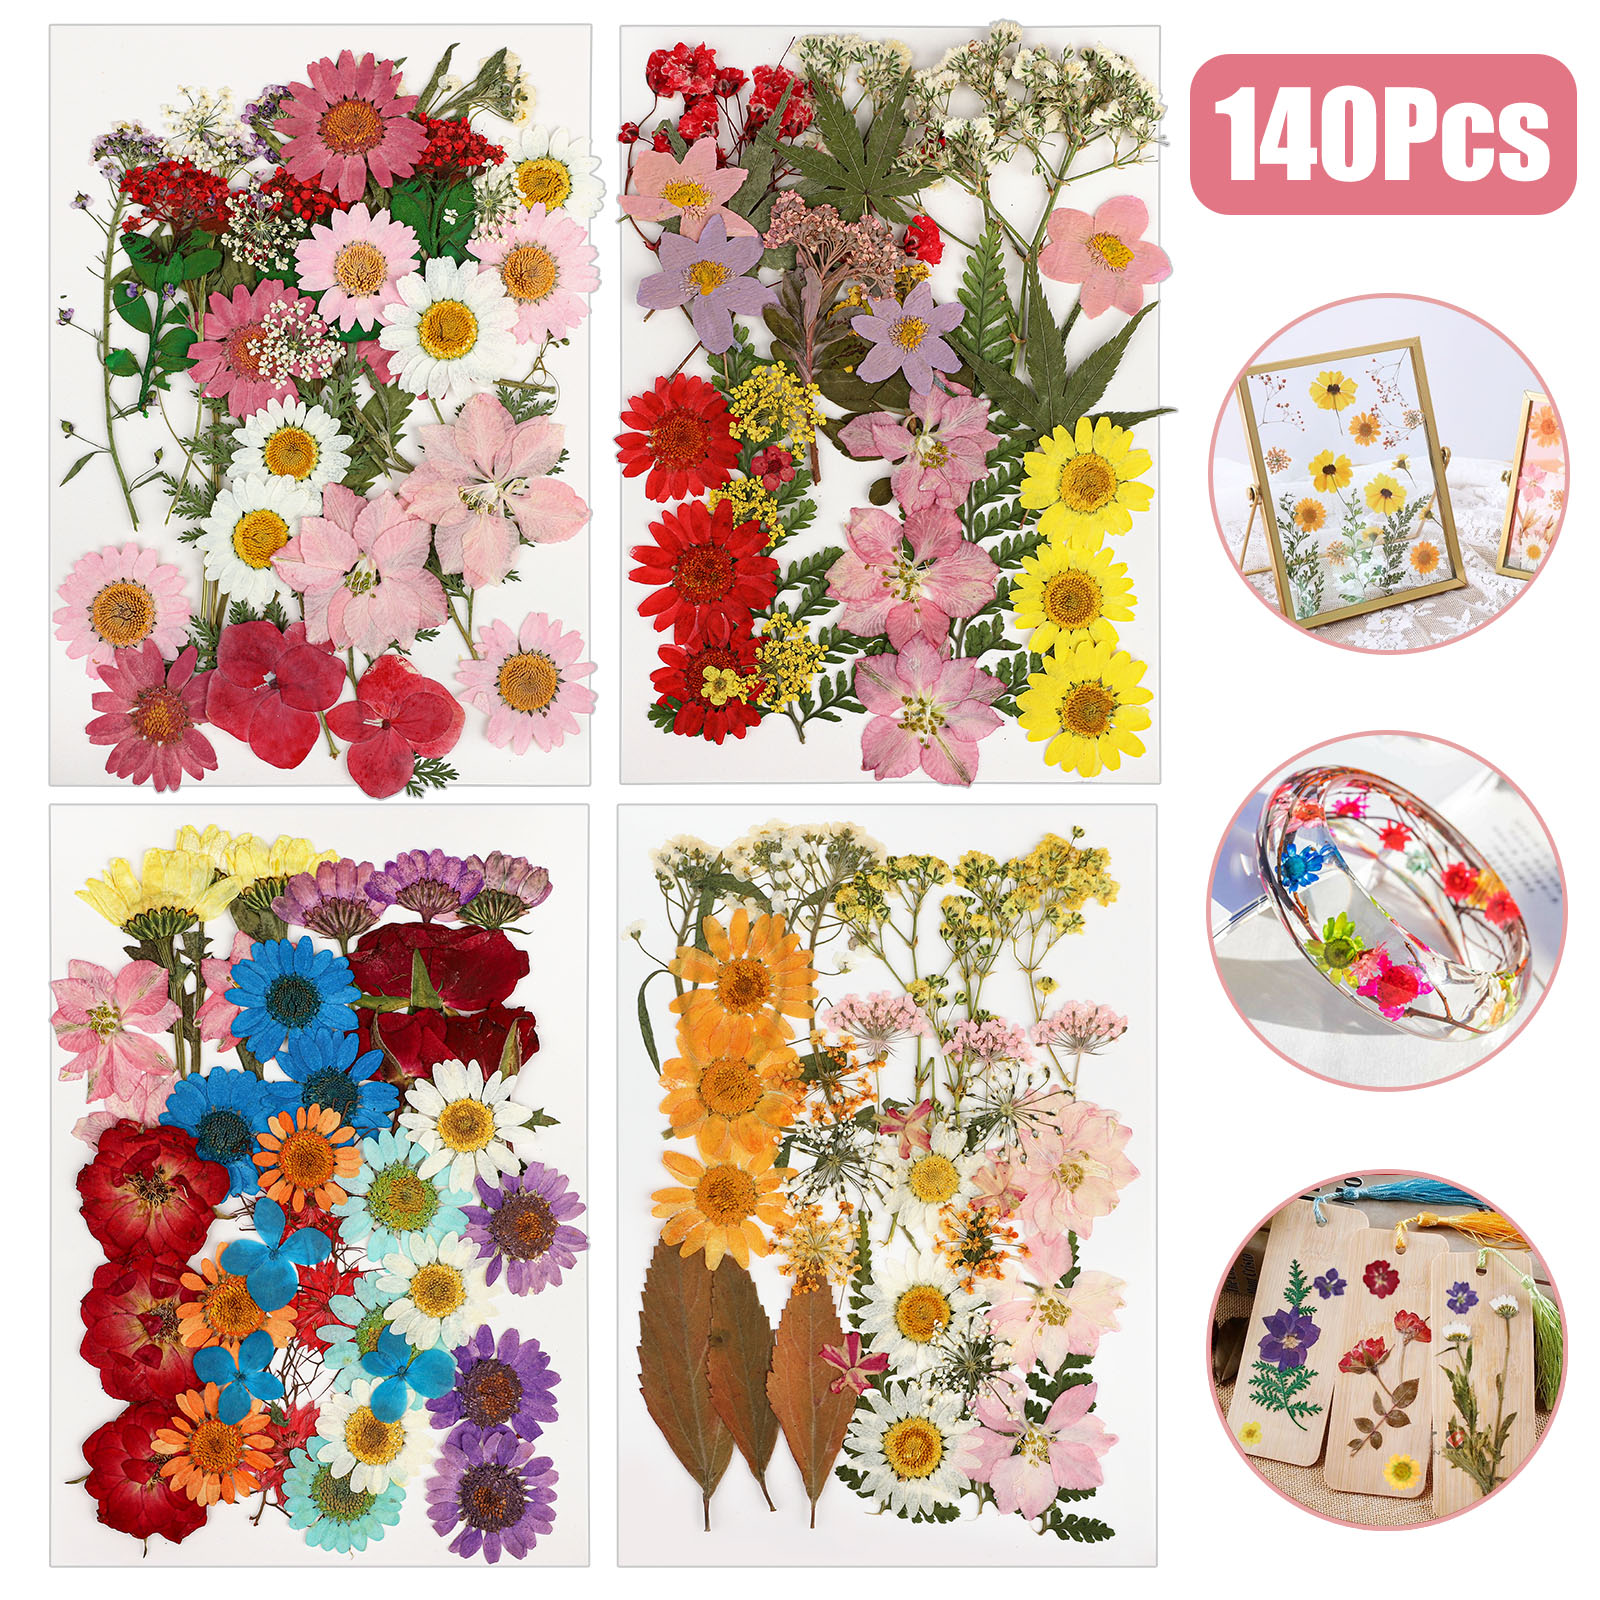 10 Bags Mixed Color Natural Dried Flowers For Resin Casting Crafts 